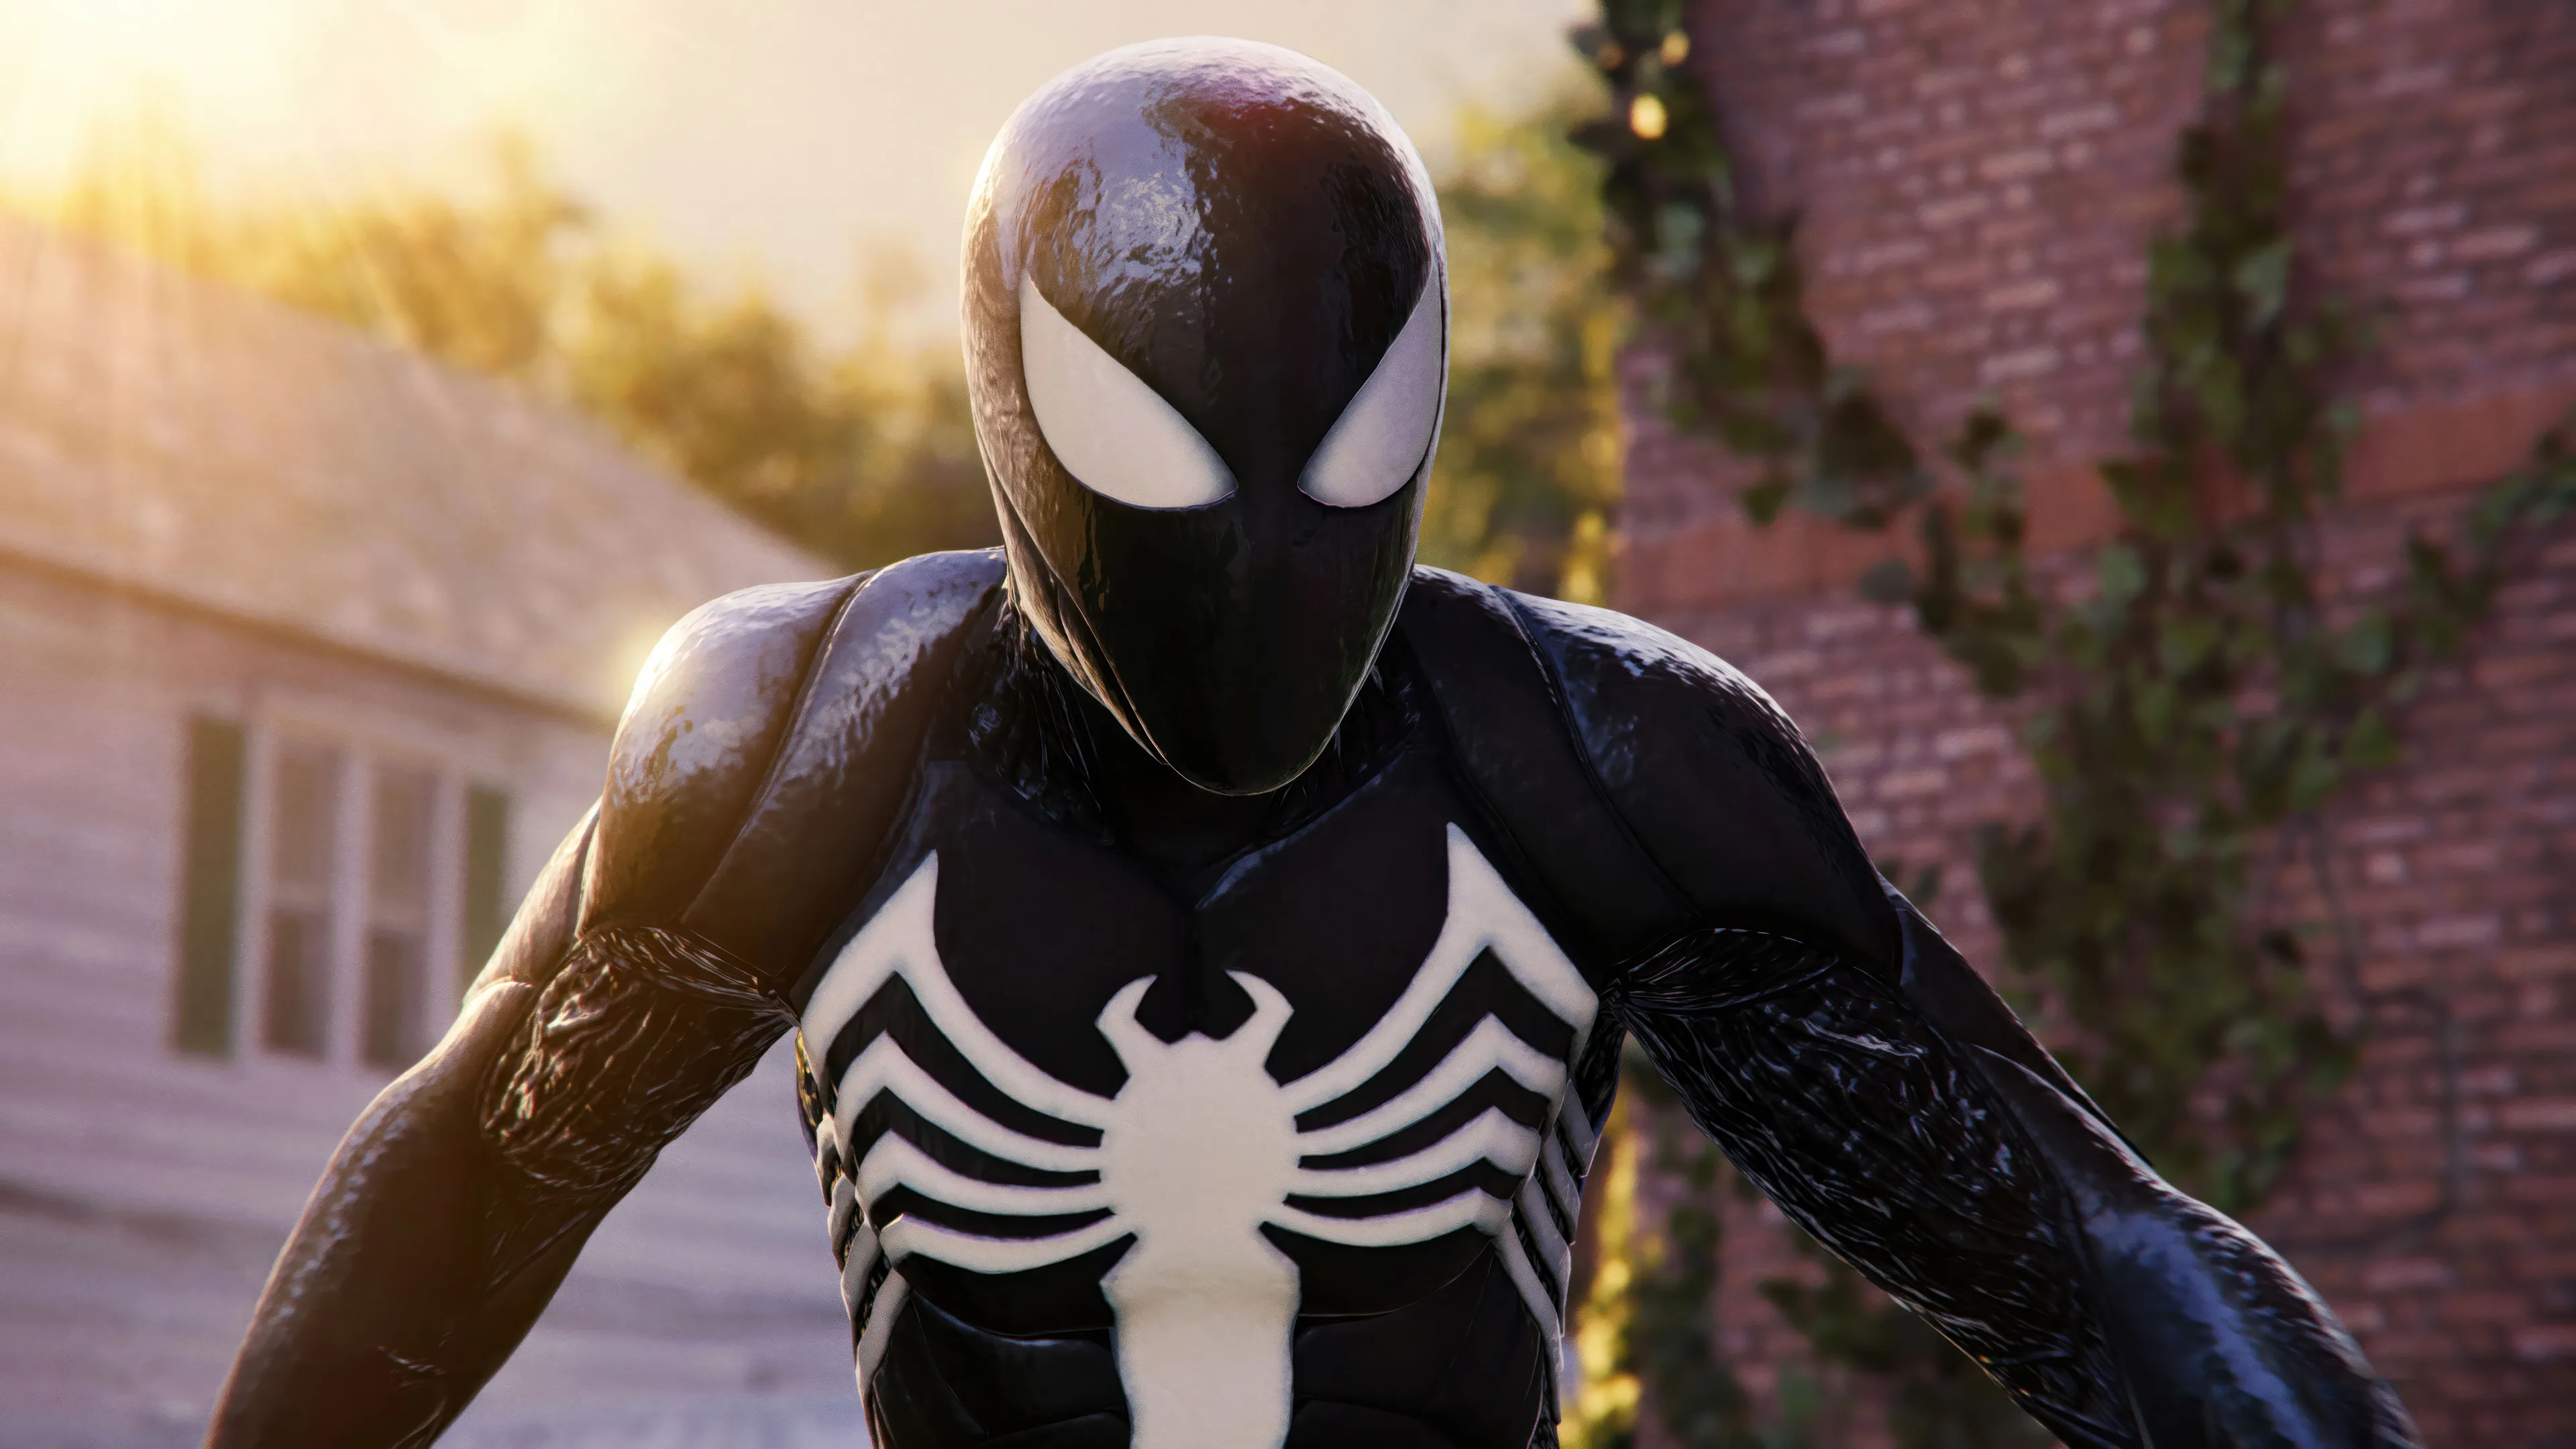 Spiderman No Way Home Black Gold Suit Wallpaper iPhone Phone 4K 7891e